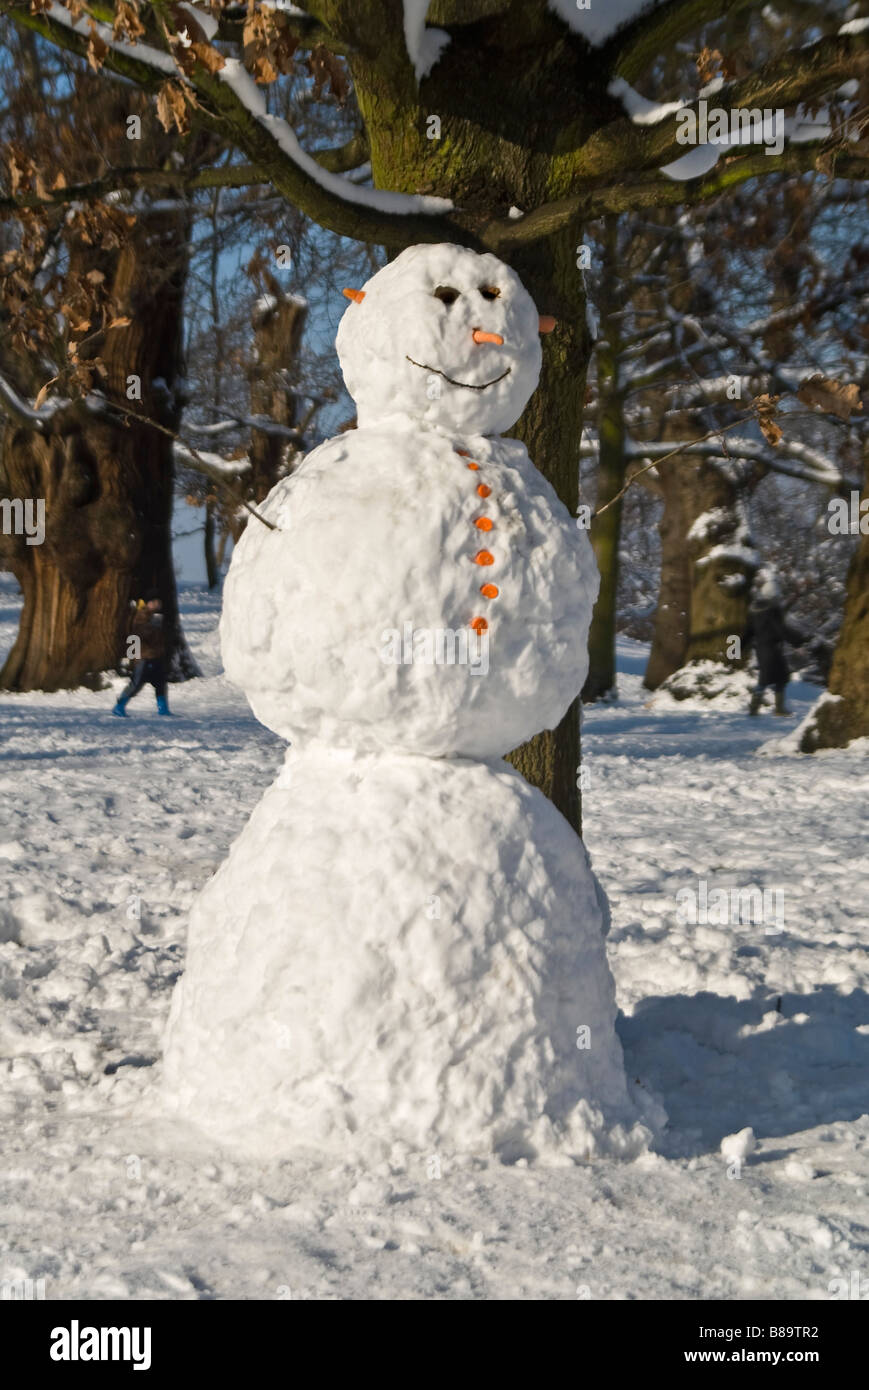 Vertical close up portrait of a traditional snowman with a carrot for his nose built in a park Stock Photo